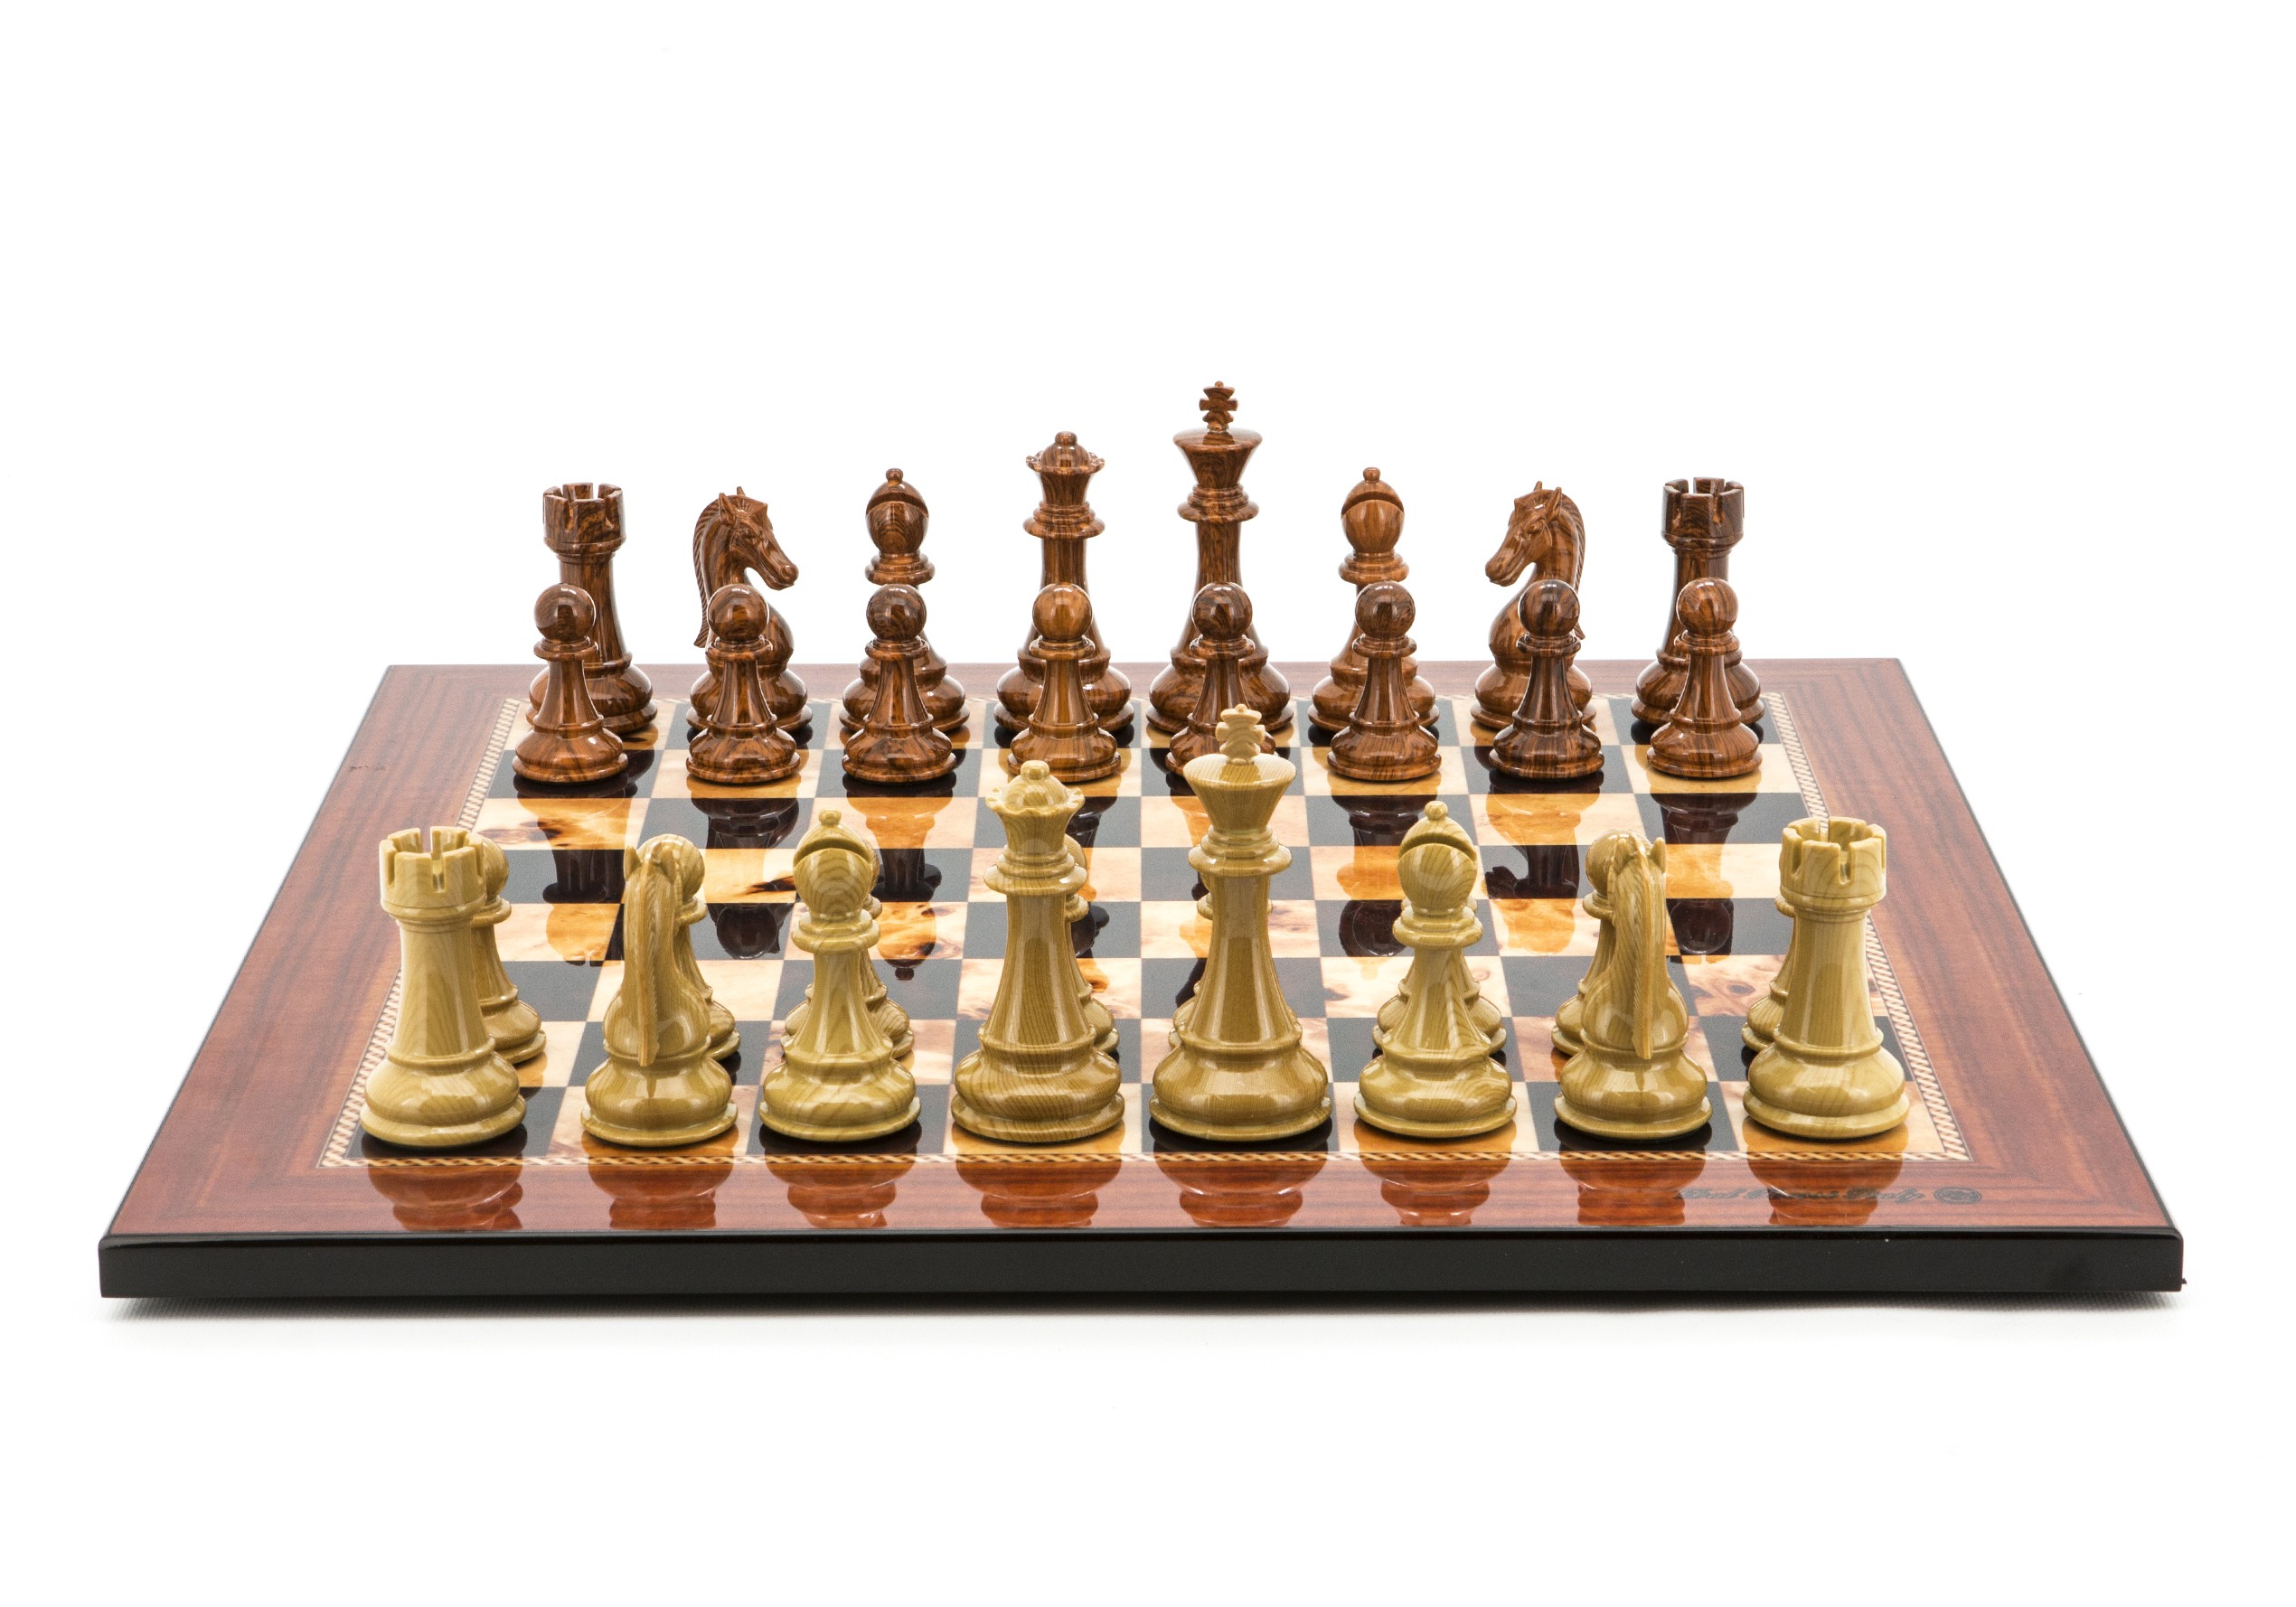 Dal Rossi Italy Chess Set Flat Walnut Shinny Finish Board 50cm, Brown and Box Wood Grain Finish Chess Pieces 110mm